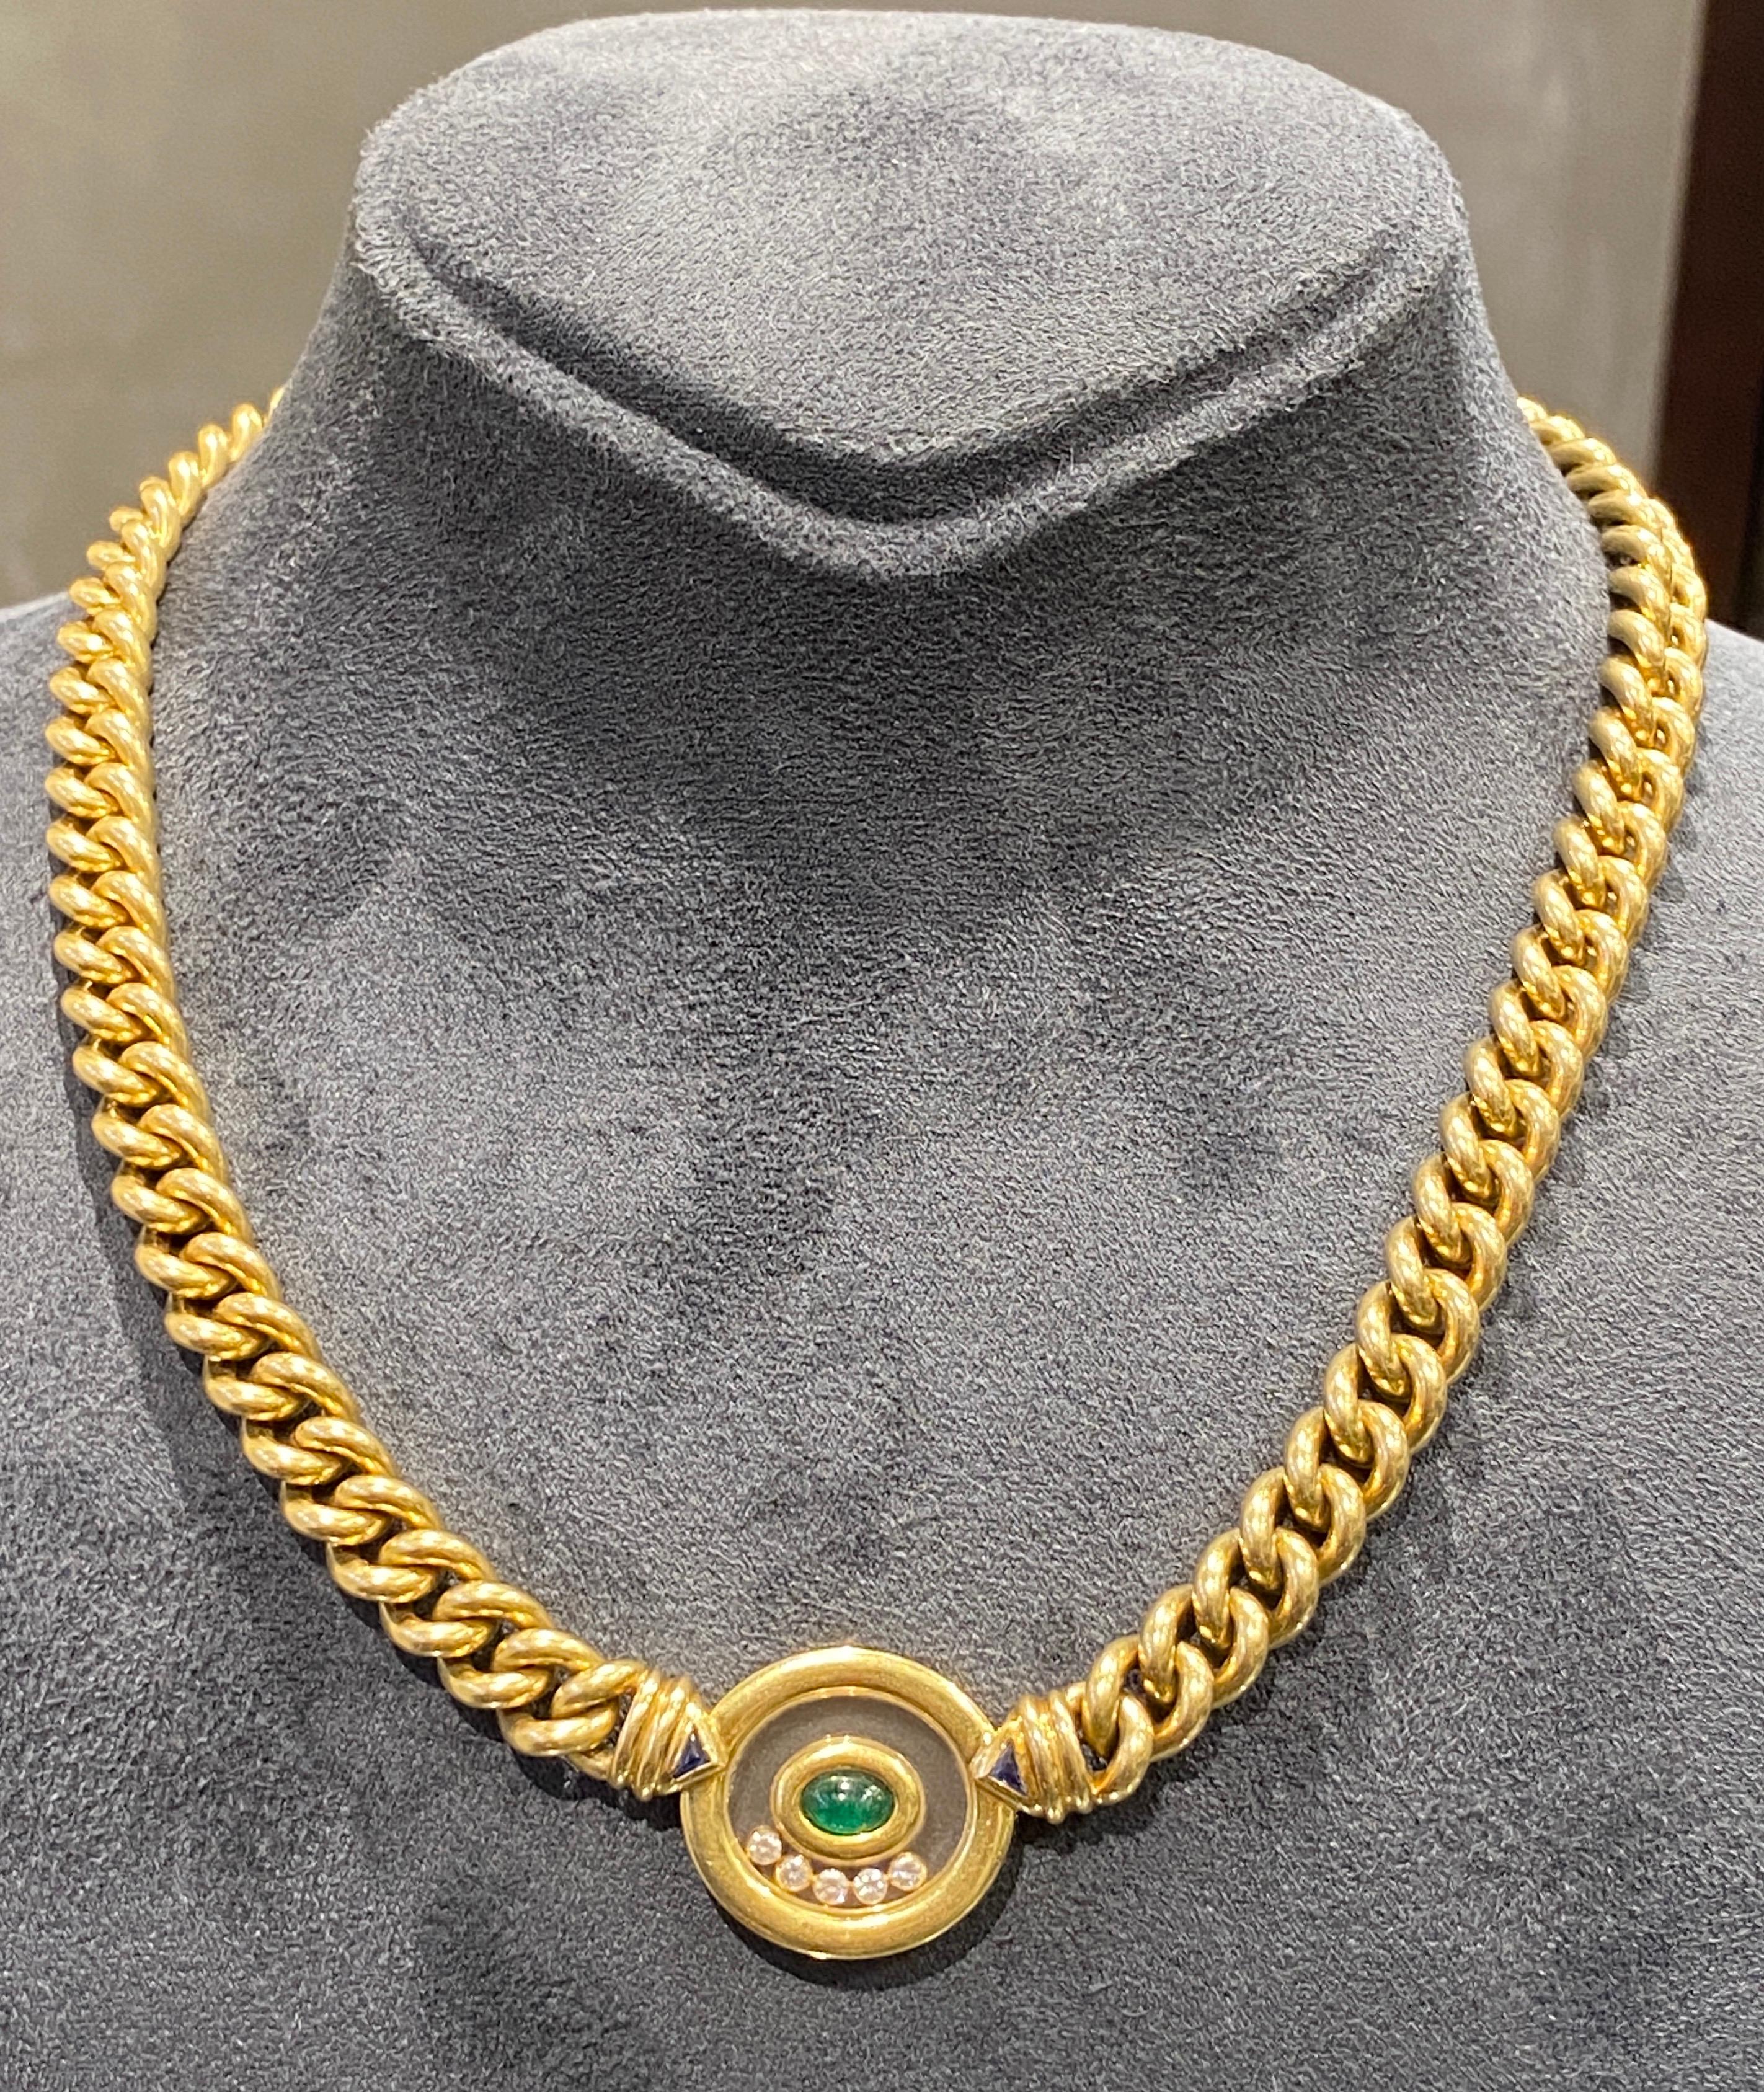 This 1980s Chopard hefty 18 carat gold chain necklace is adorned with a cabochon emerald, 2 small sapphires and 5 happy diamonds.